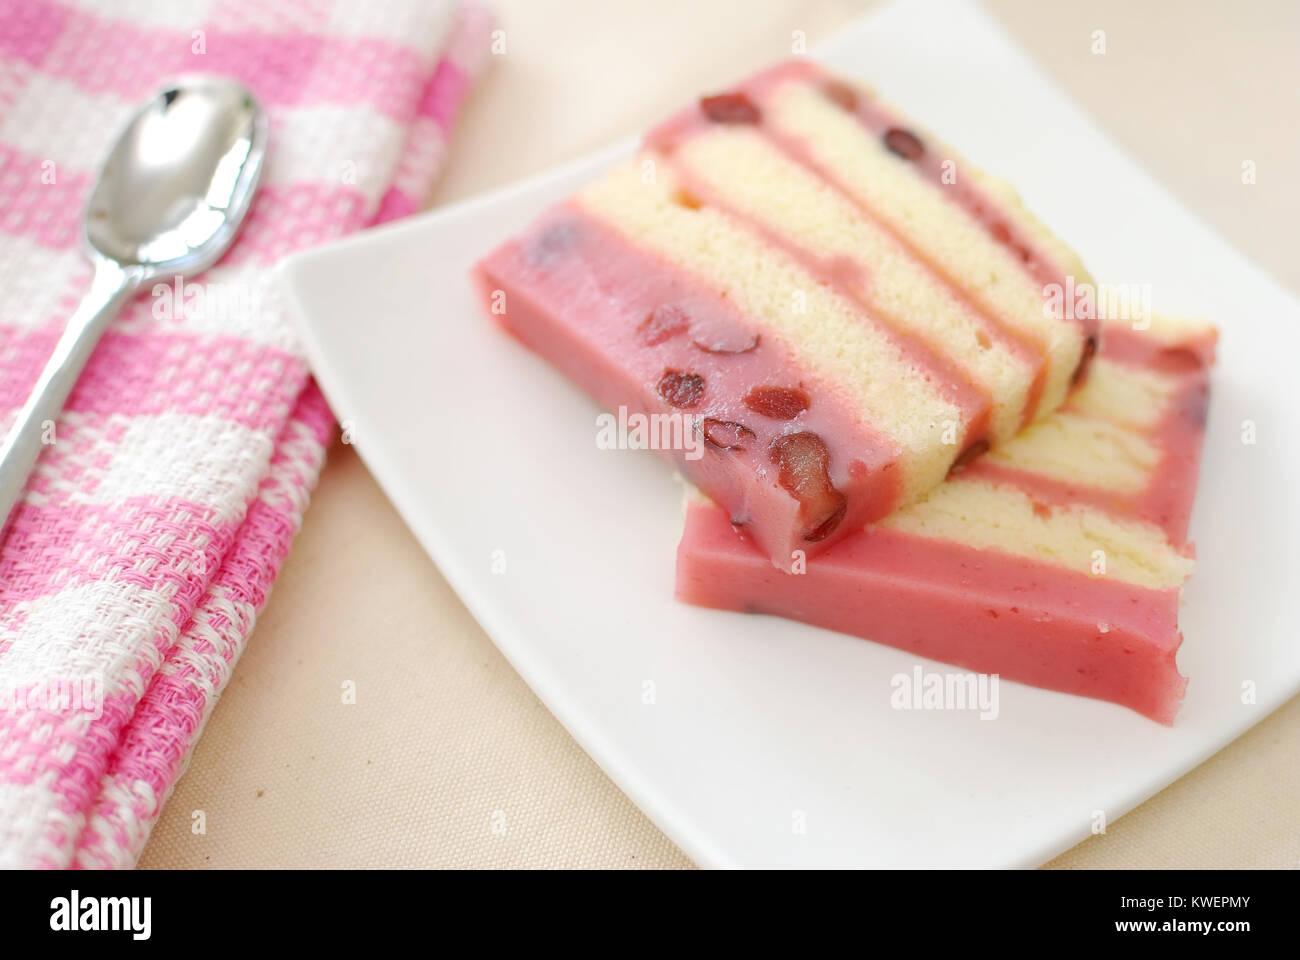 Healthy red bean cake for dessert with spoon. For concepts such as food and beverage, diet and nutrition, and celebrations and festives. Stock Photo